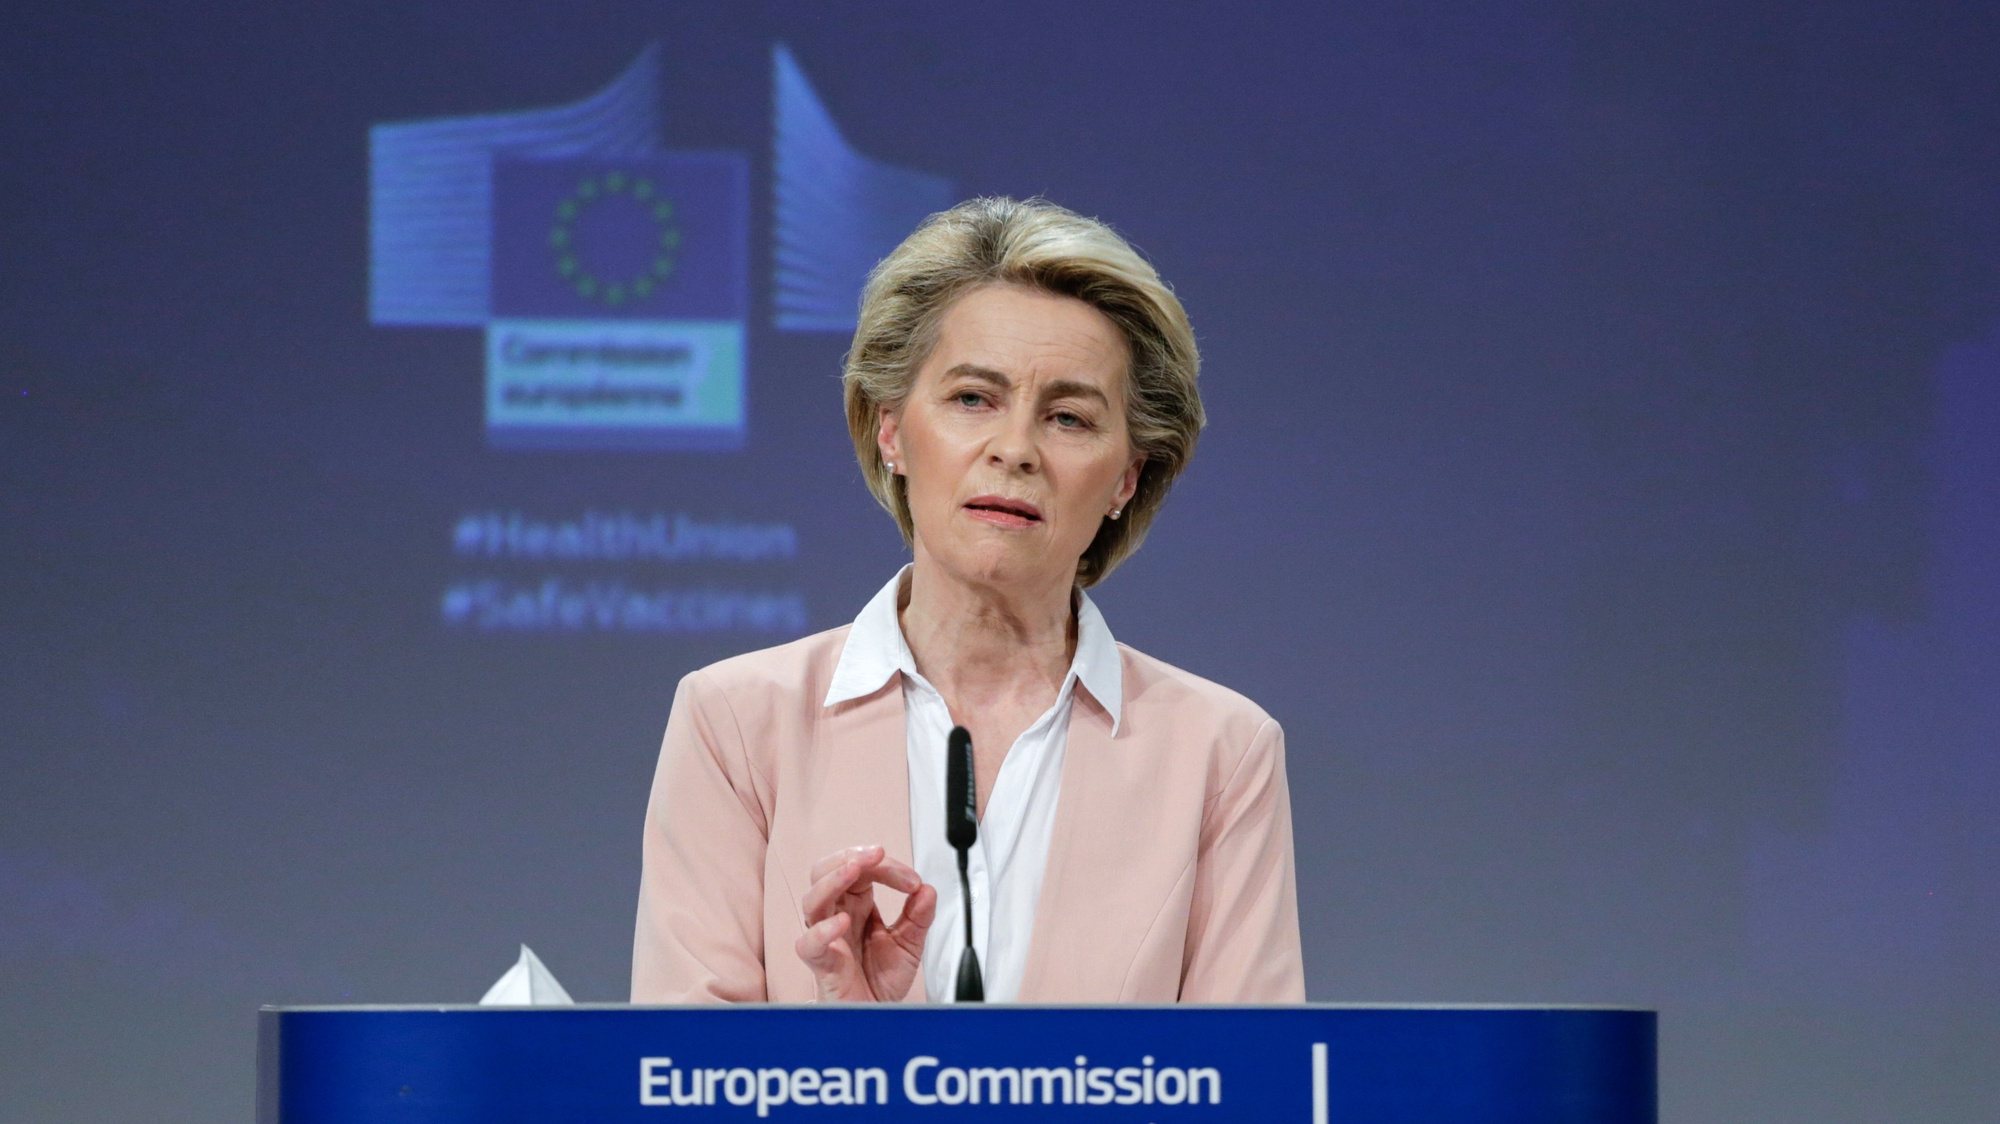 epa09018476 European Commission President Ursula von der Leyen gives a press conference on the HERA Incubator to anticipate the threat of the coronavirus variants at the European Commission Headquarters in Brussels, Belgium, 17 February 2021.  EPA/ARIS OIKONOMOU / POOL